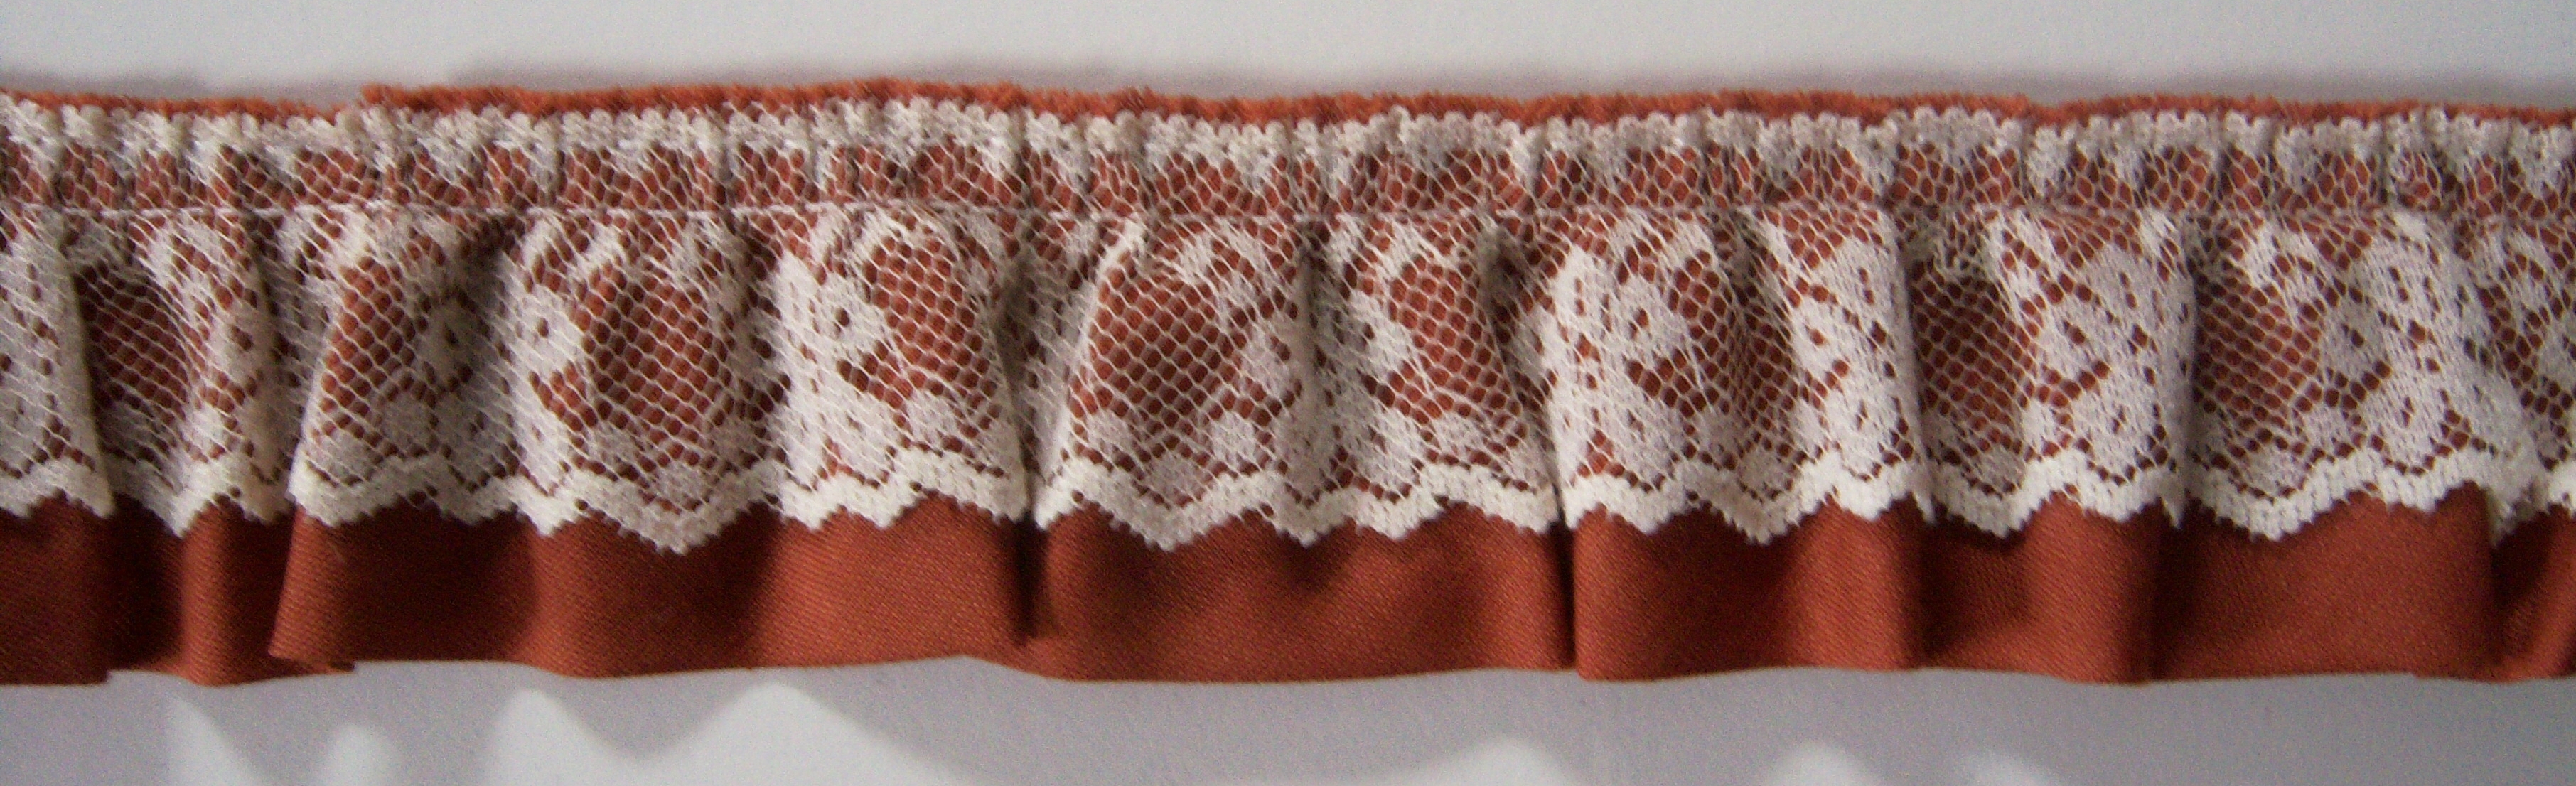 Natural Lace/Sienna Ruffled Poly Cotton